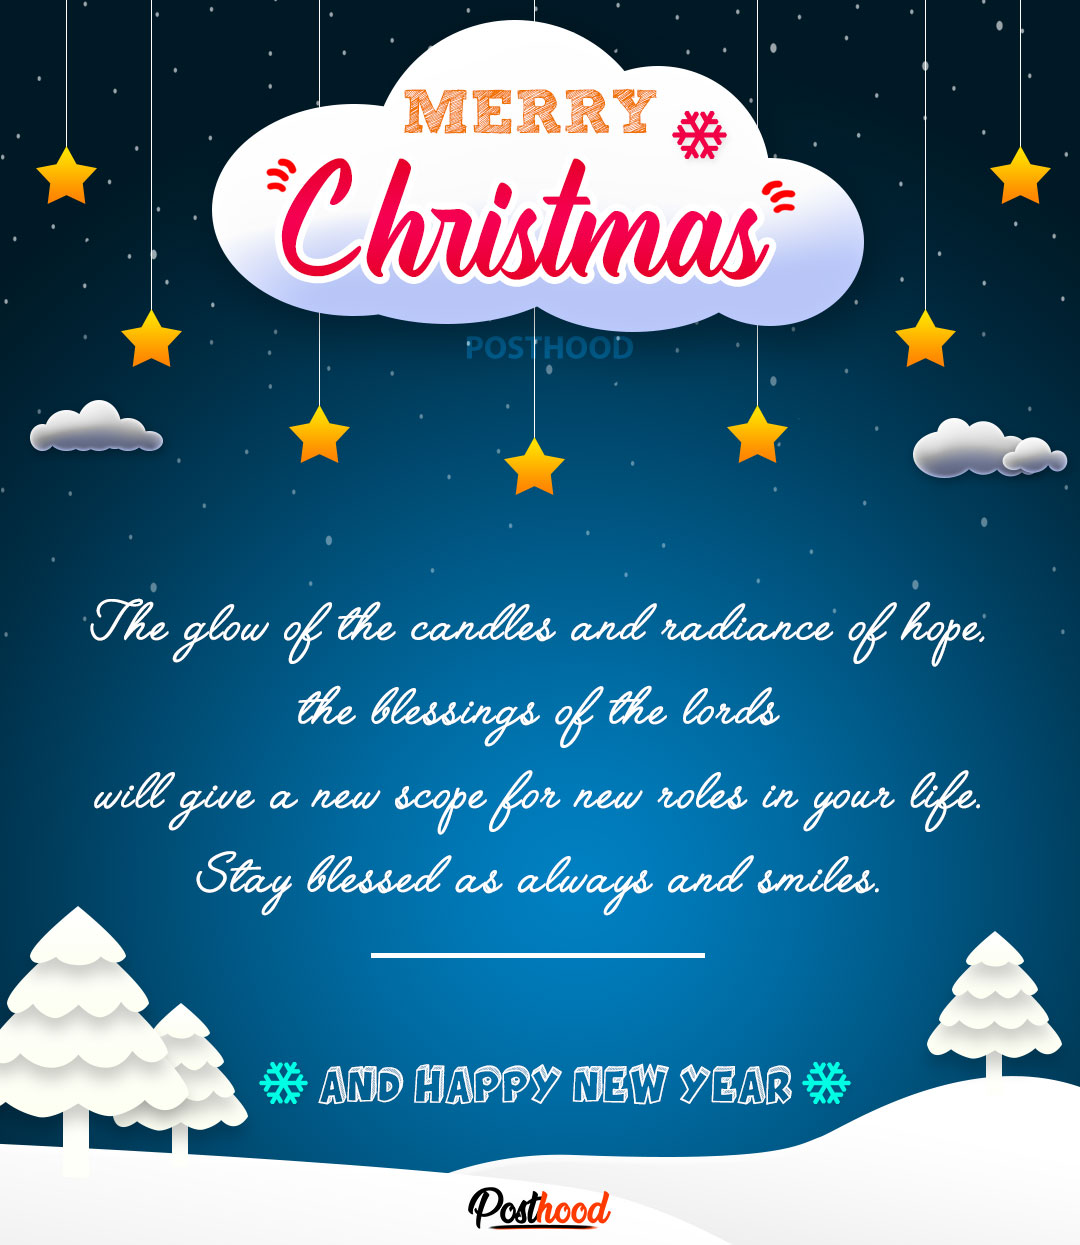 Send these best Christmas quotes to wish your family and friends. These heartwarming Christmas blessings will pour out your feeling for them. Merry Christmas!!